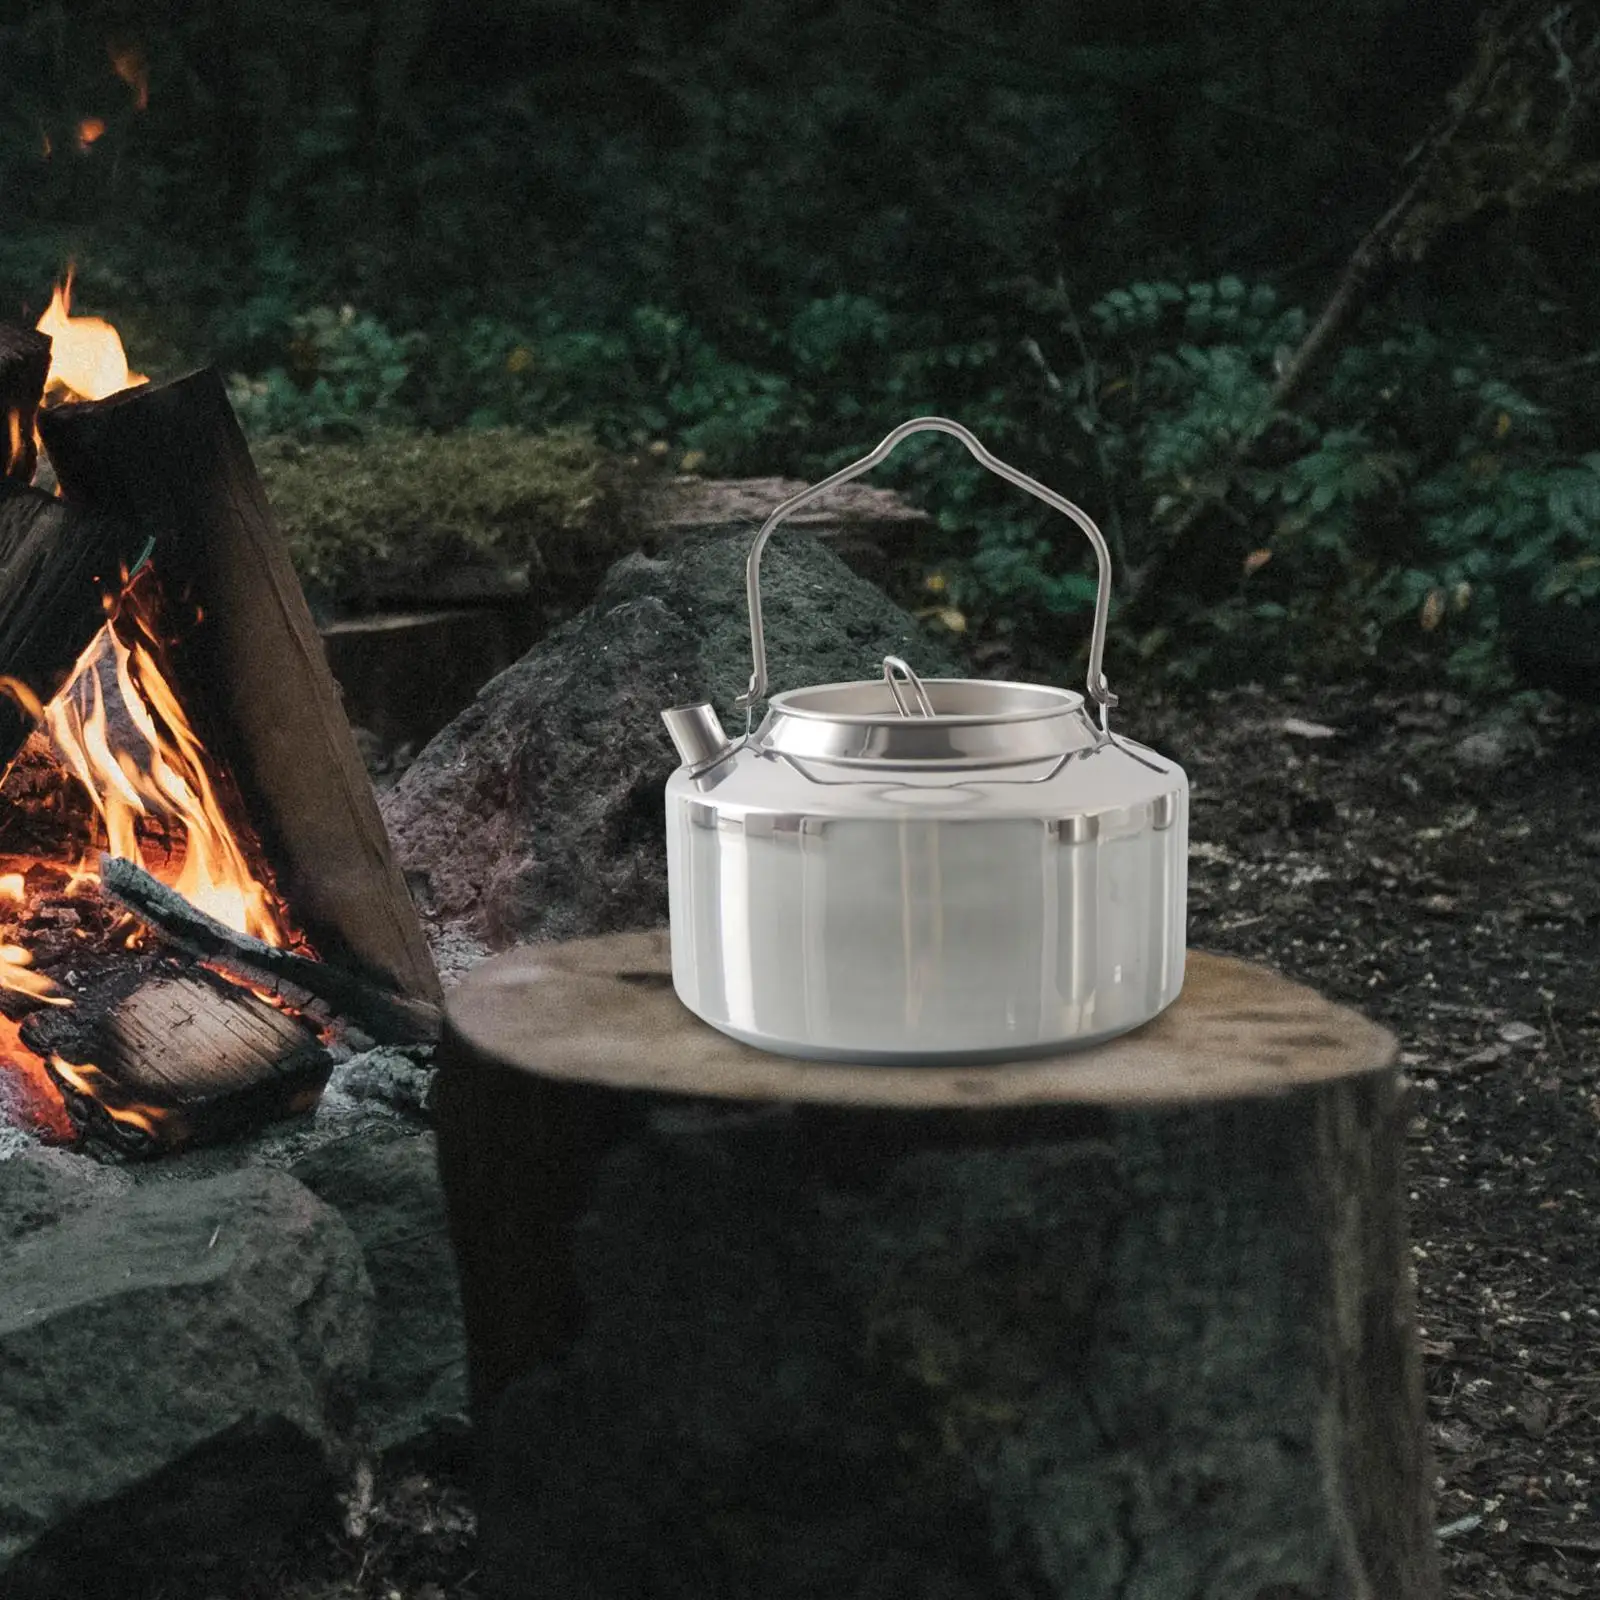 Outdoor Camping Kettle Durable Pot Ultralight 1.3L Stainless Steel for Campfire Hiking